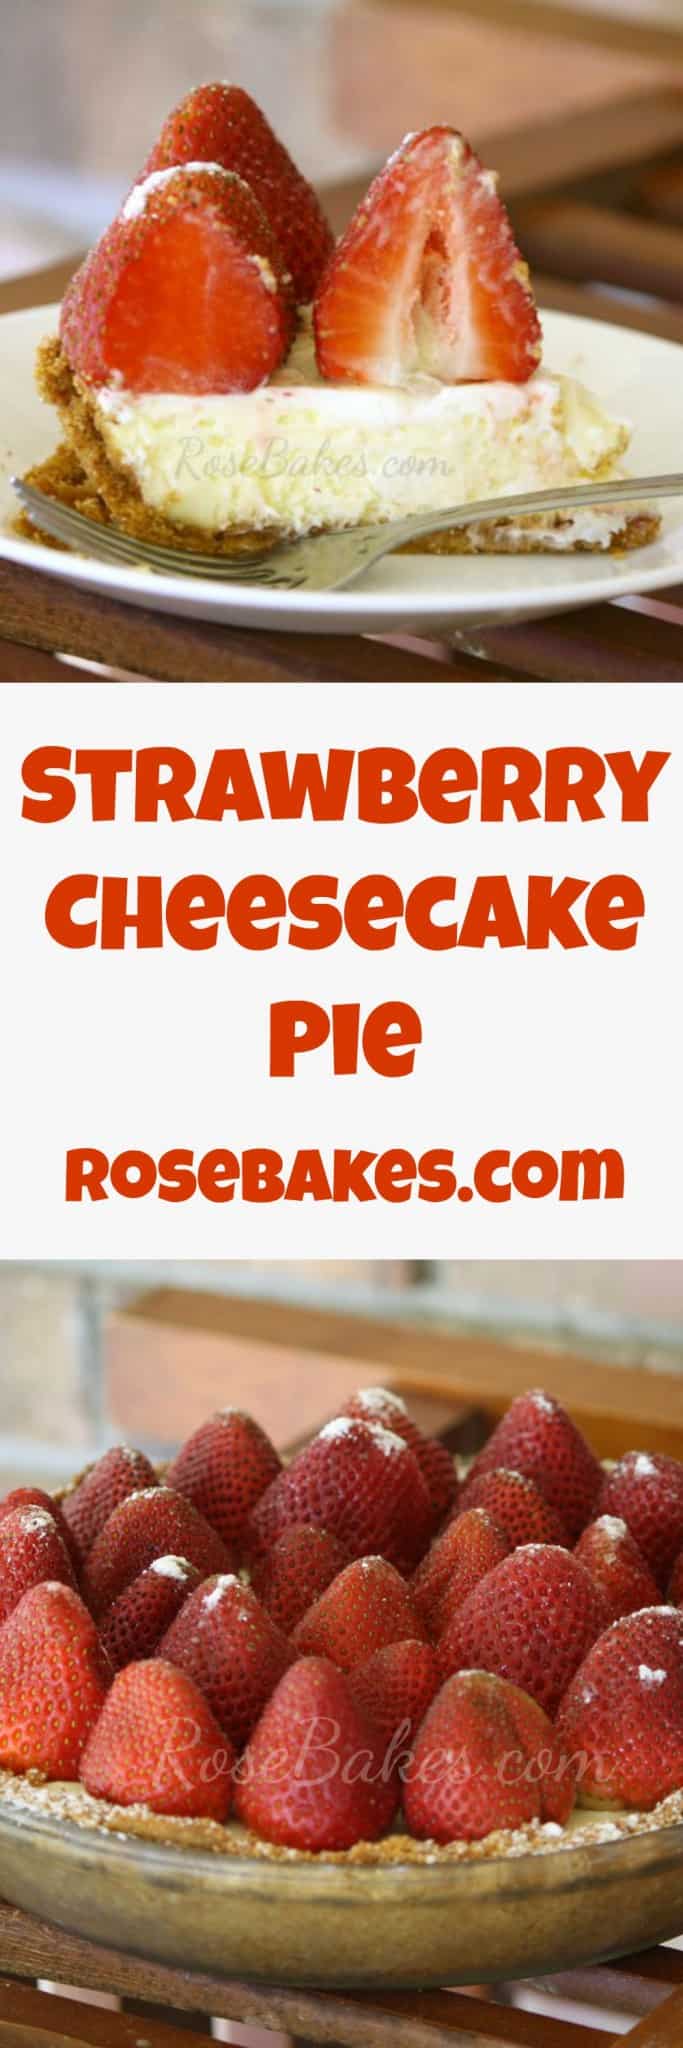 Strawberry Cheesecake Pie by Rose Bakes